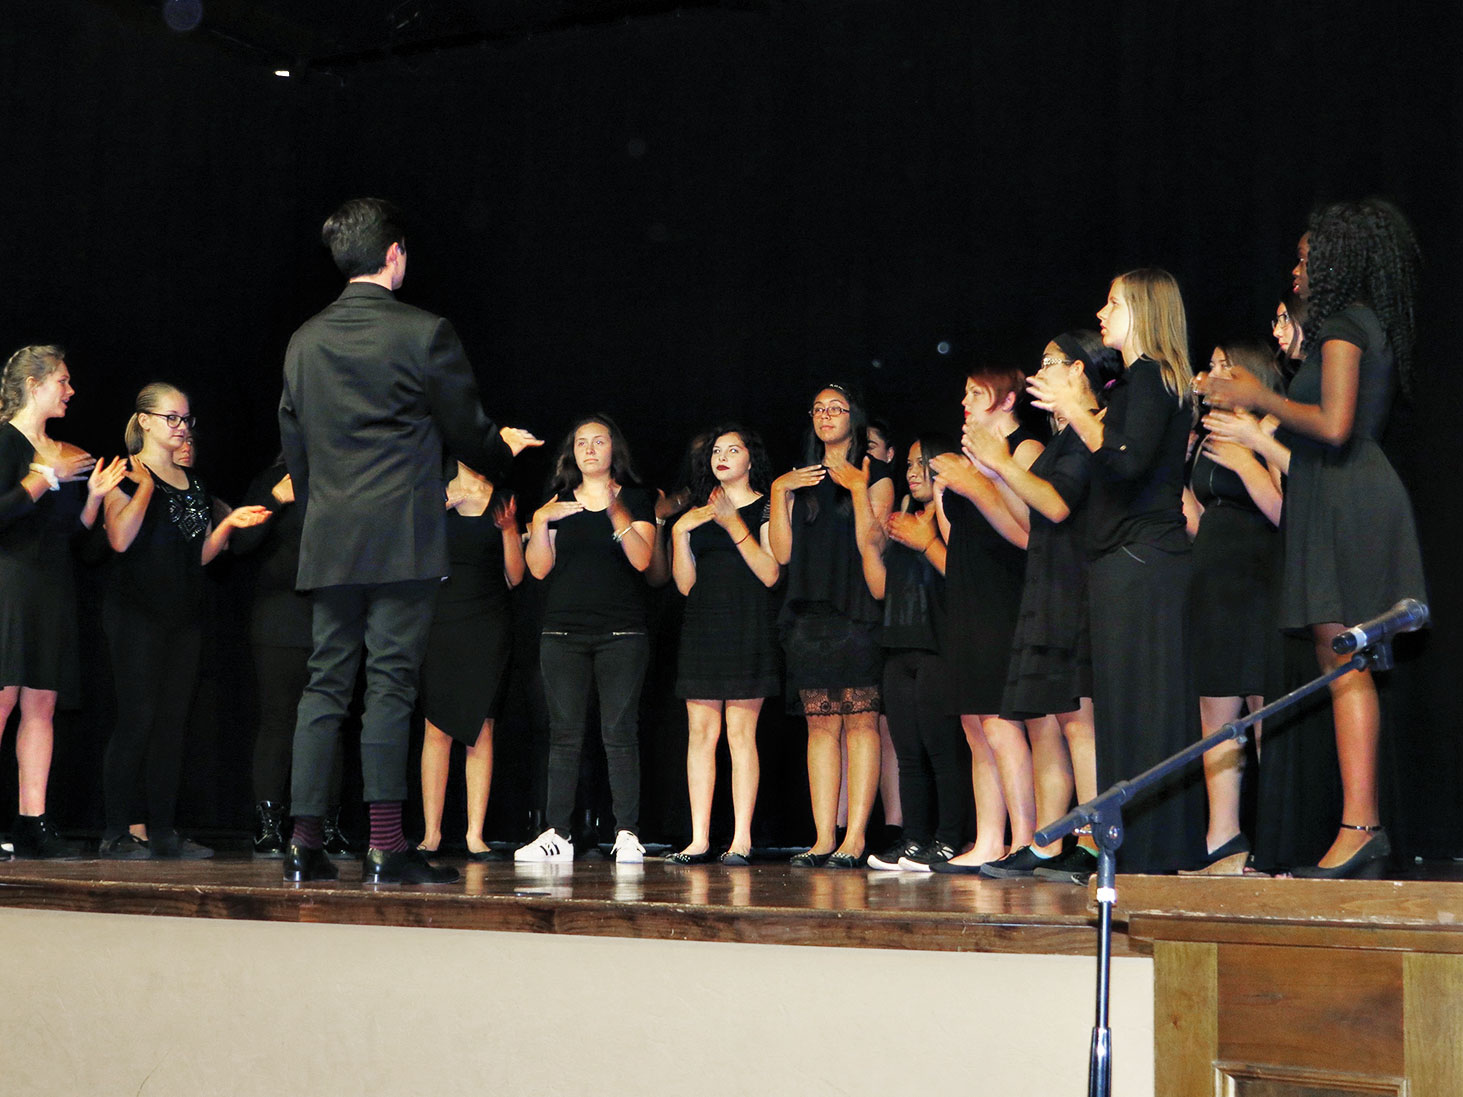 Walden Grove Women’s Chorale performing during the monthly program; photo by Diane Quinn